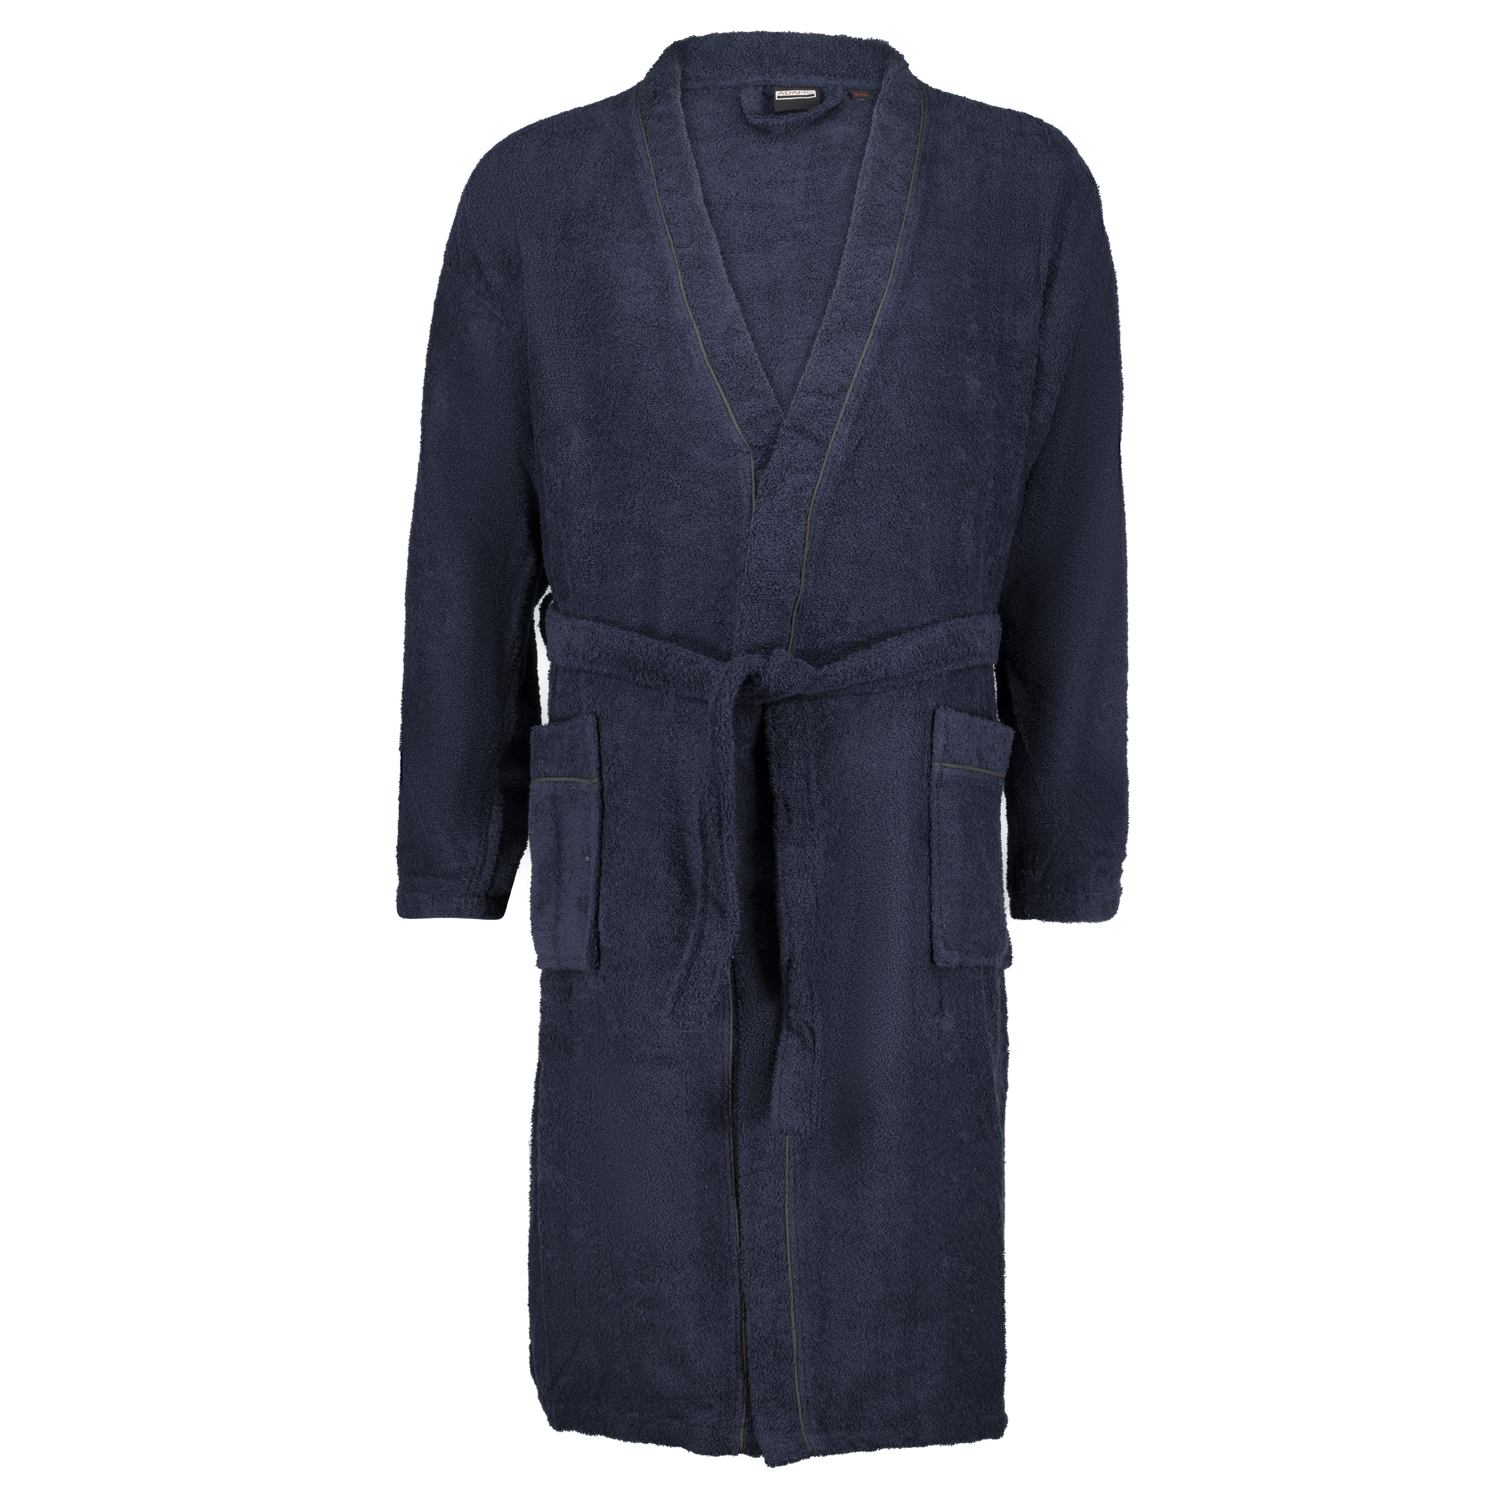 Bathrobe for men TALL FIT in navy by ADAMO series "Jago" in oversizes up to 5XLT